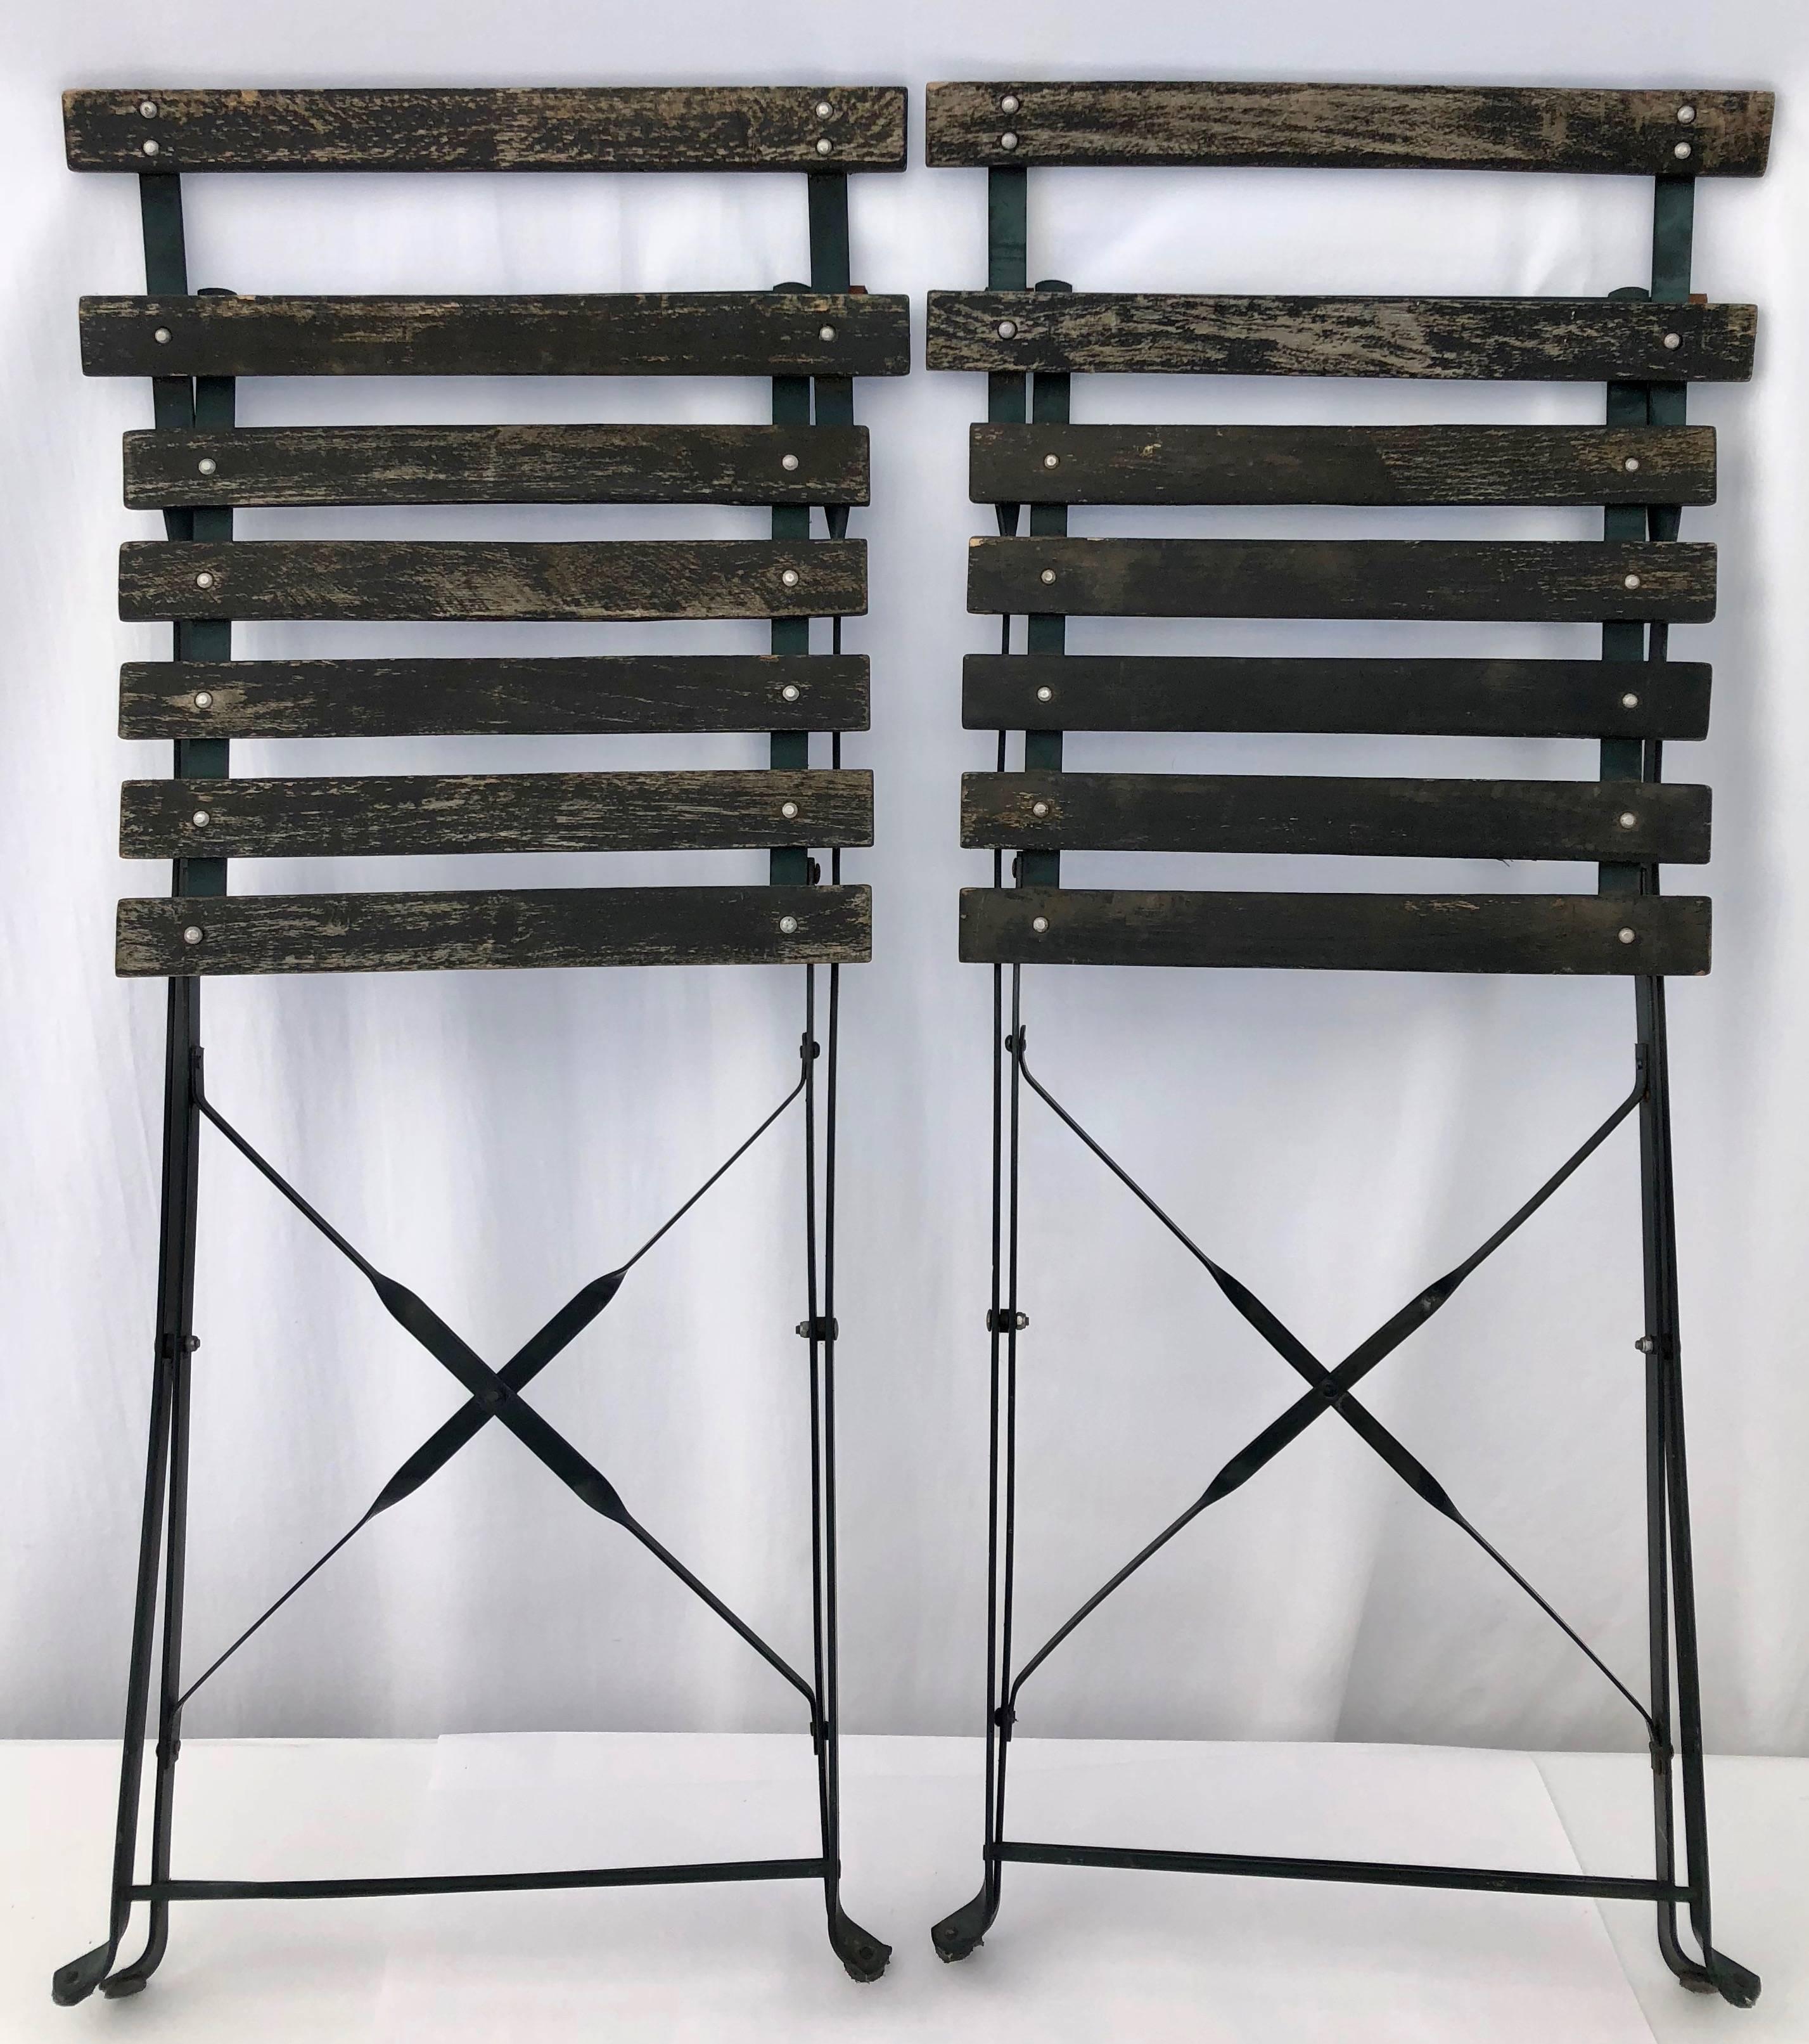 These are a charming pair of French foldable garden chairs in a great green. They are made of wood and metal and sturdy although lightweight and easy to carry. They are from the 1950s and have a great patina on them.

Size:
Folded: W 16.5, D 2, H